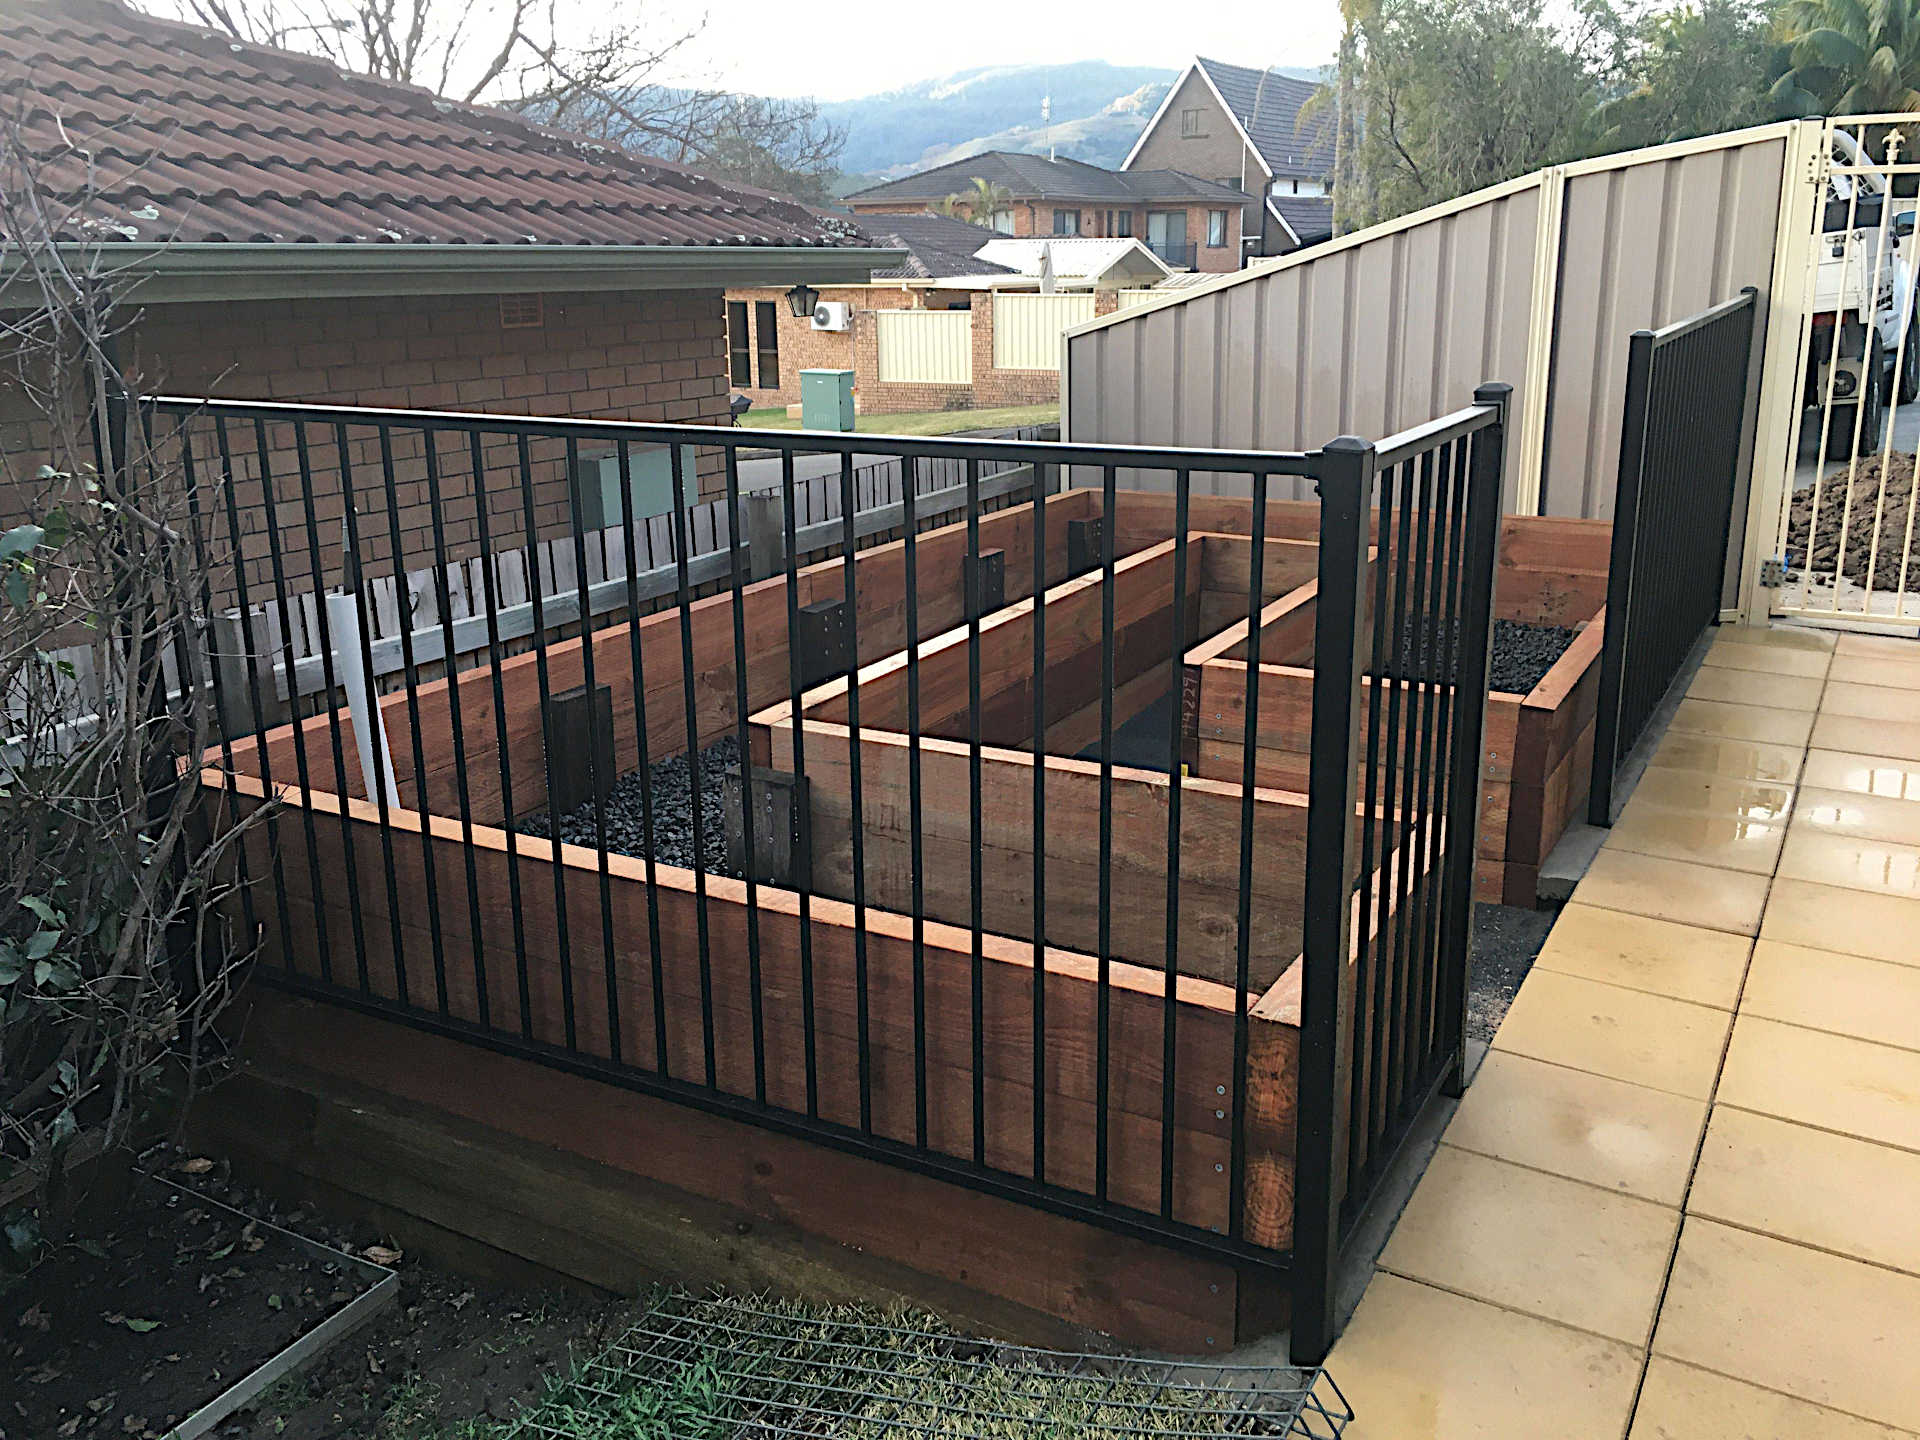 Treated Pine Raised Vegetable Garden Bed with aggregate for drainage Figtree Wollongong NSW